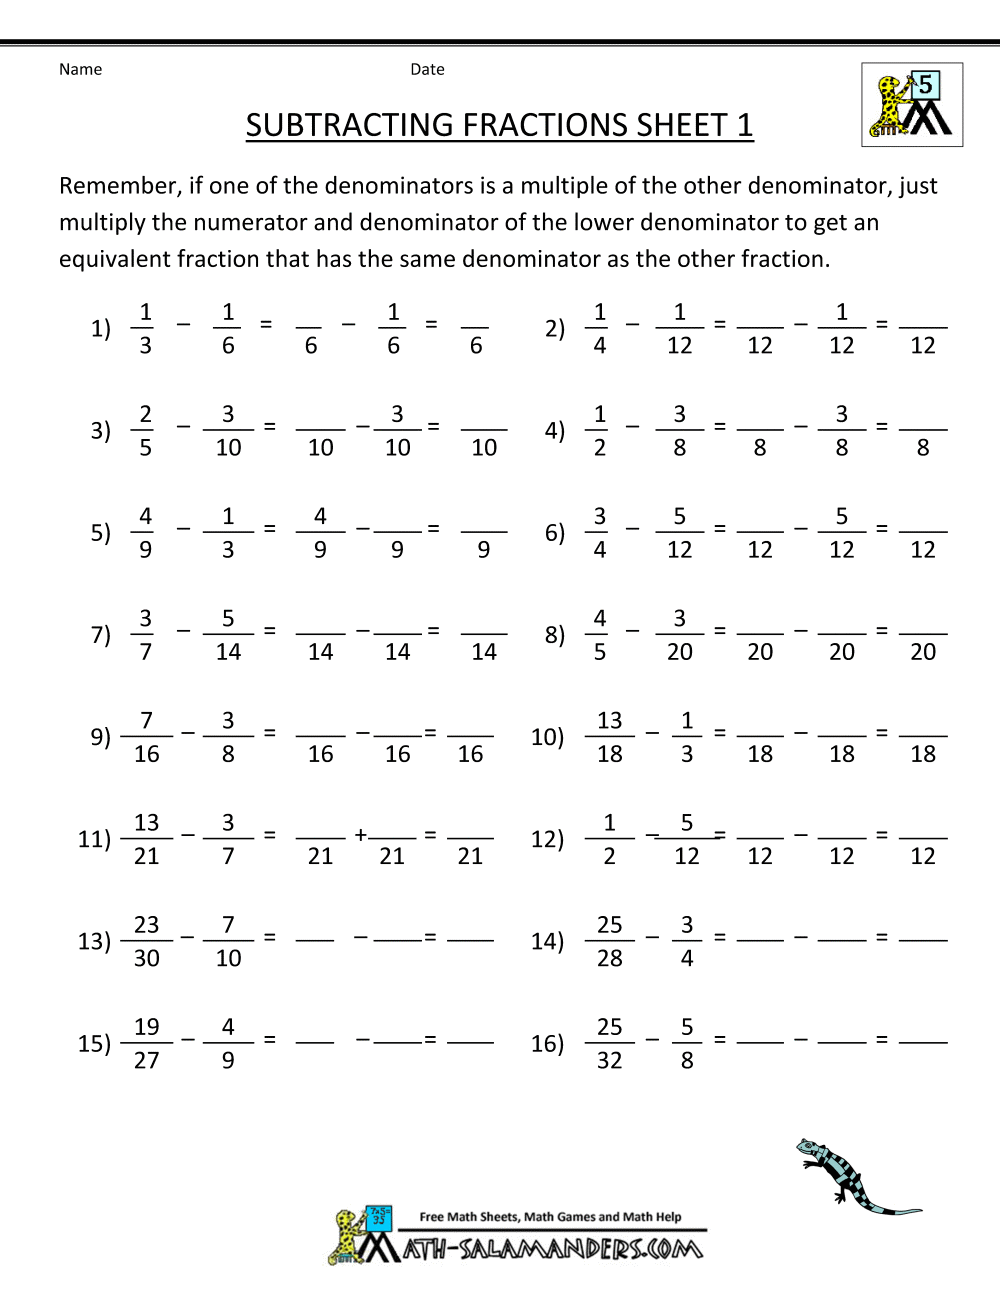 Free Fraction Worksheets Subtracting Fractions 1